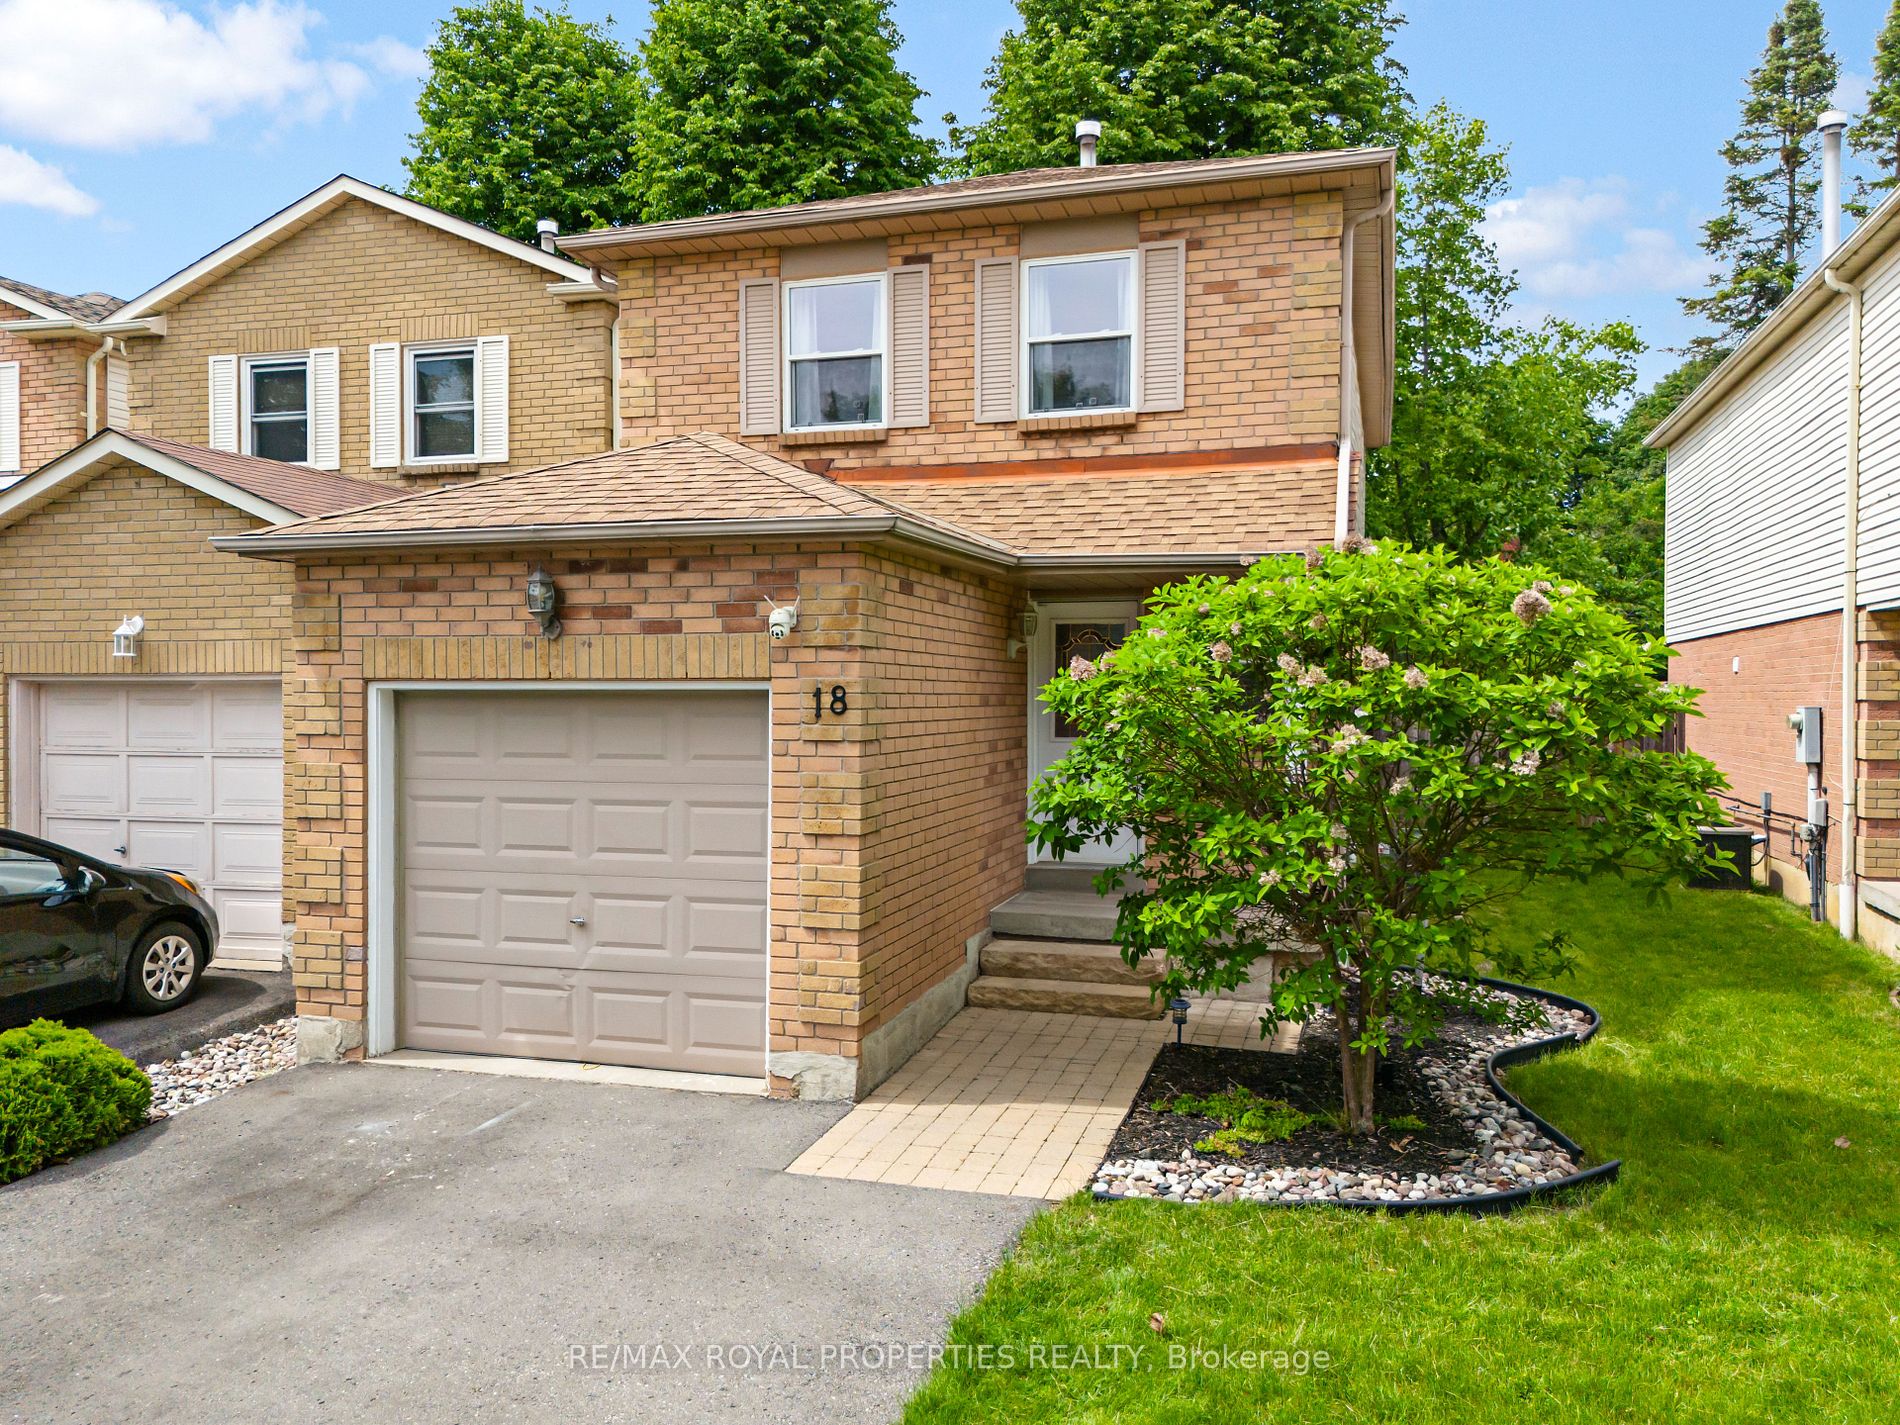 Detached house for sale at 18 Schilling Crt Whitby Ontario